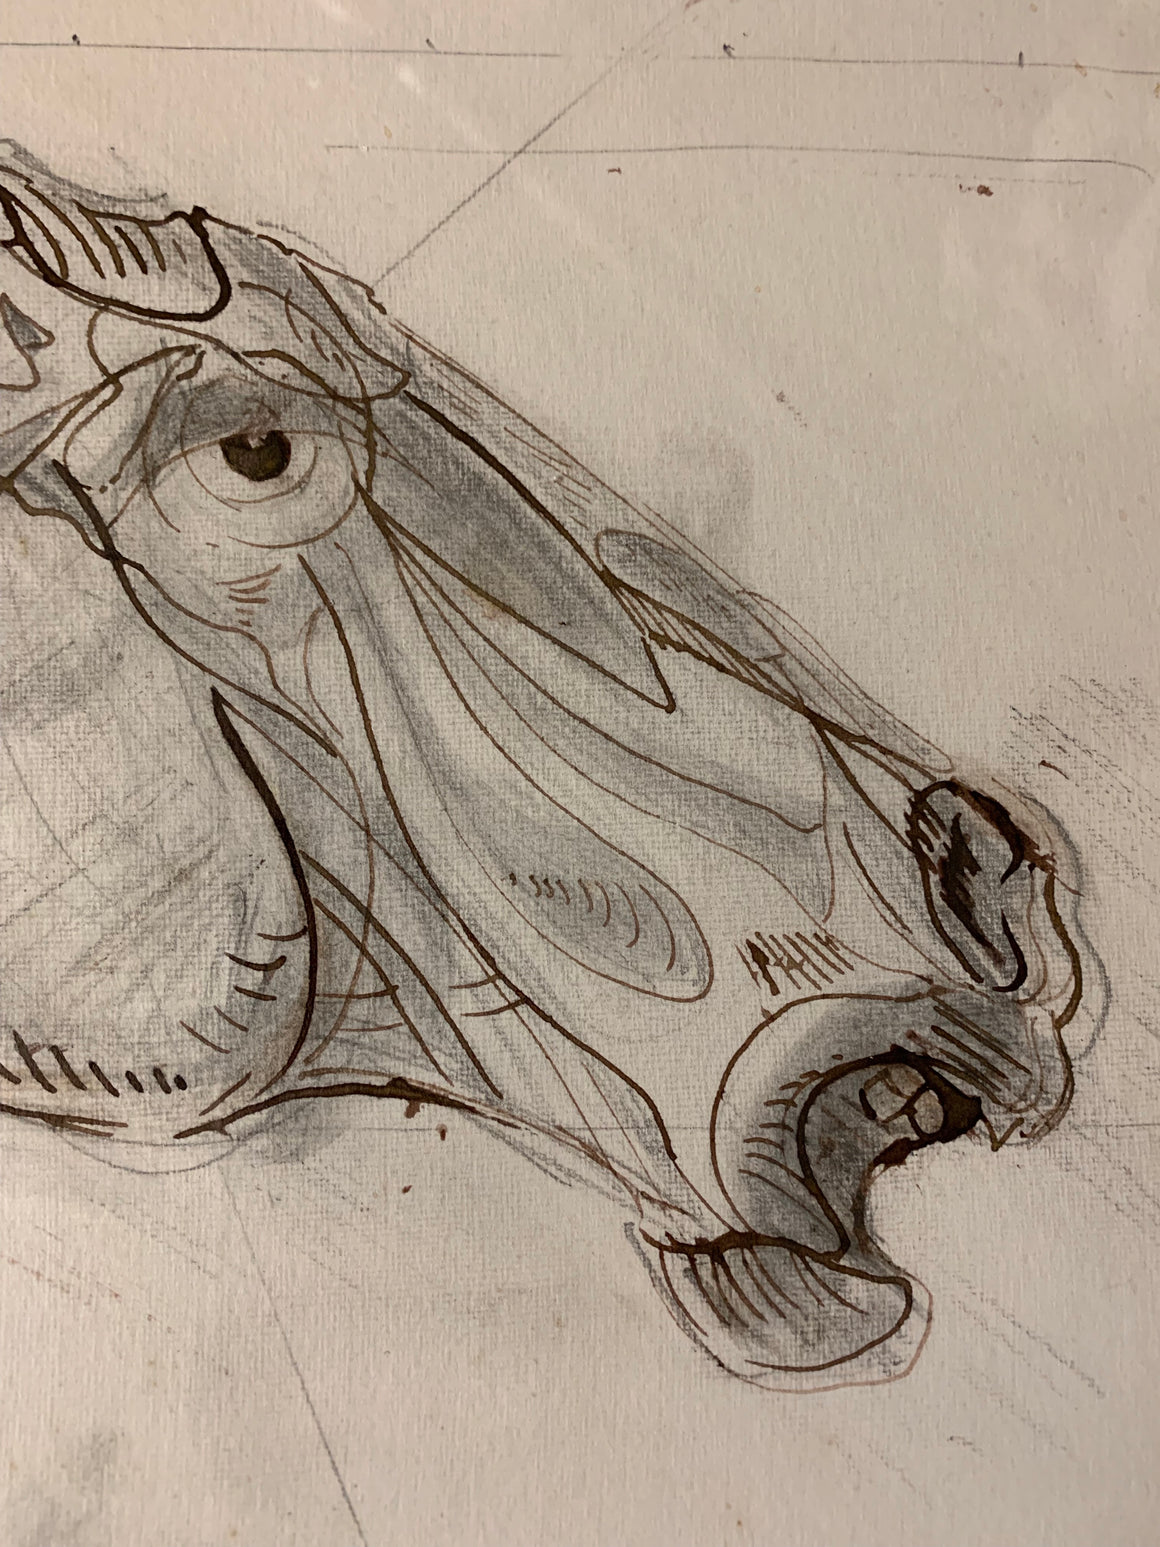 An original Renaissance style anatomical pen and ink drawing of a horse